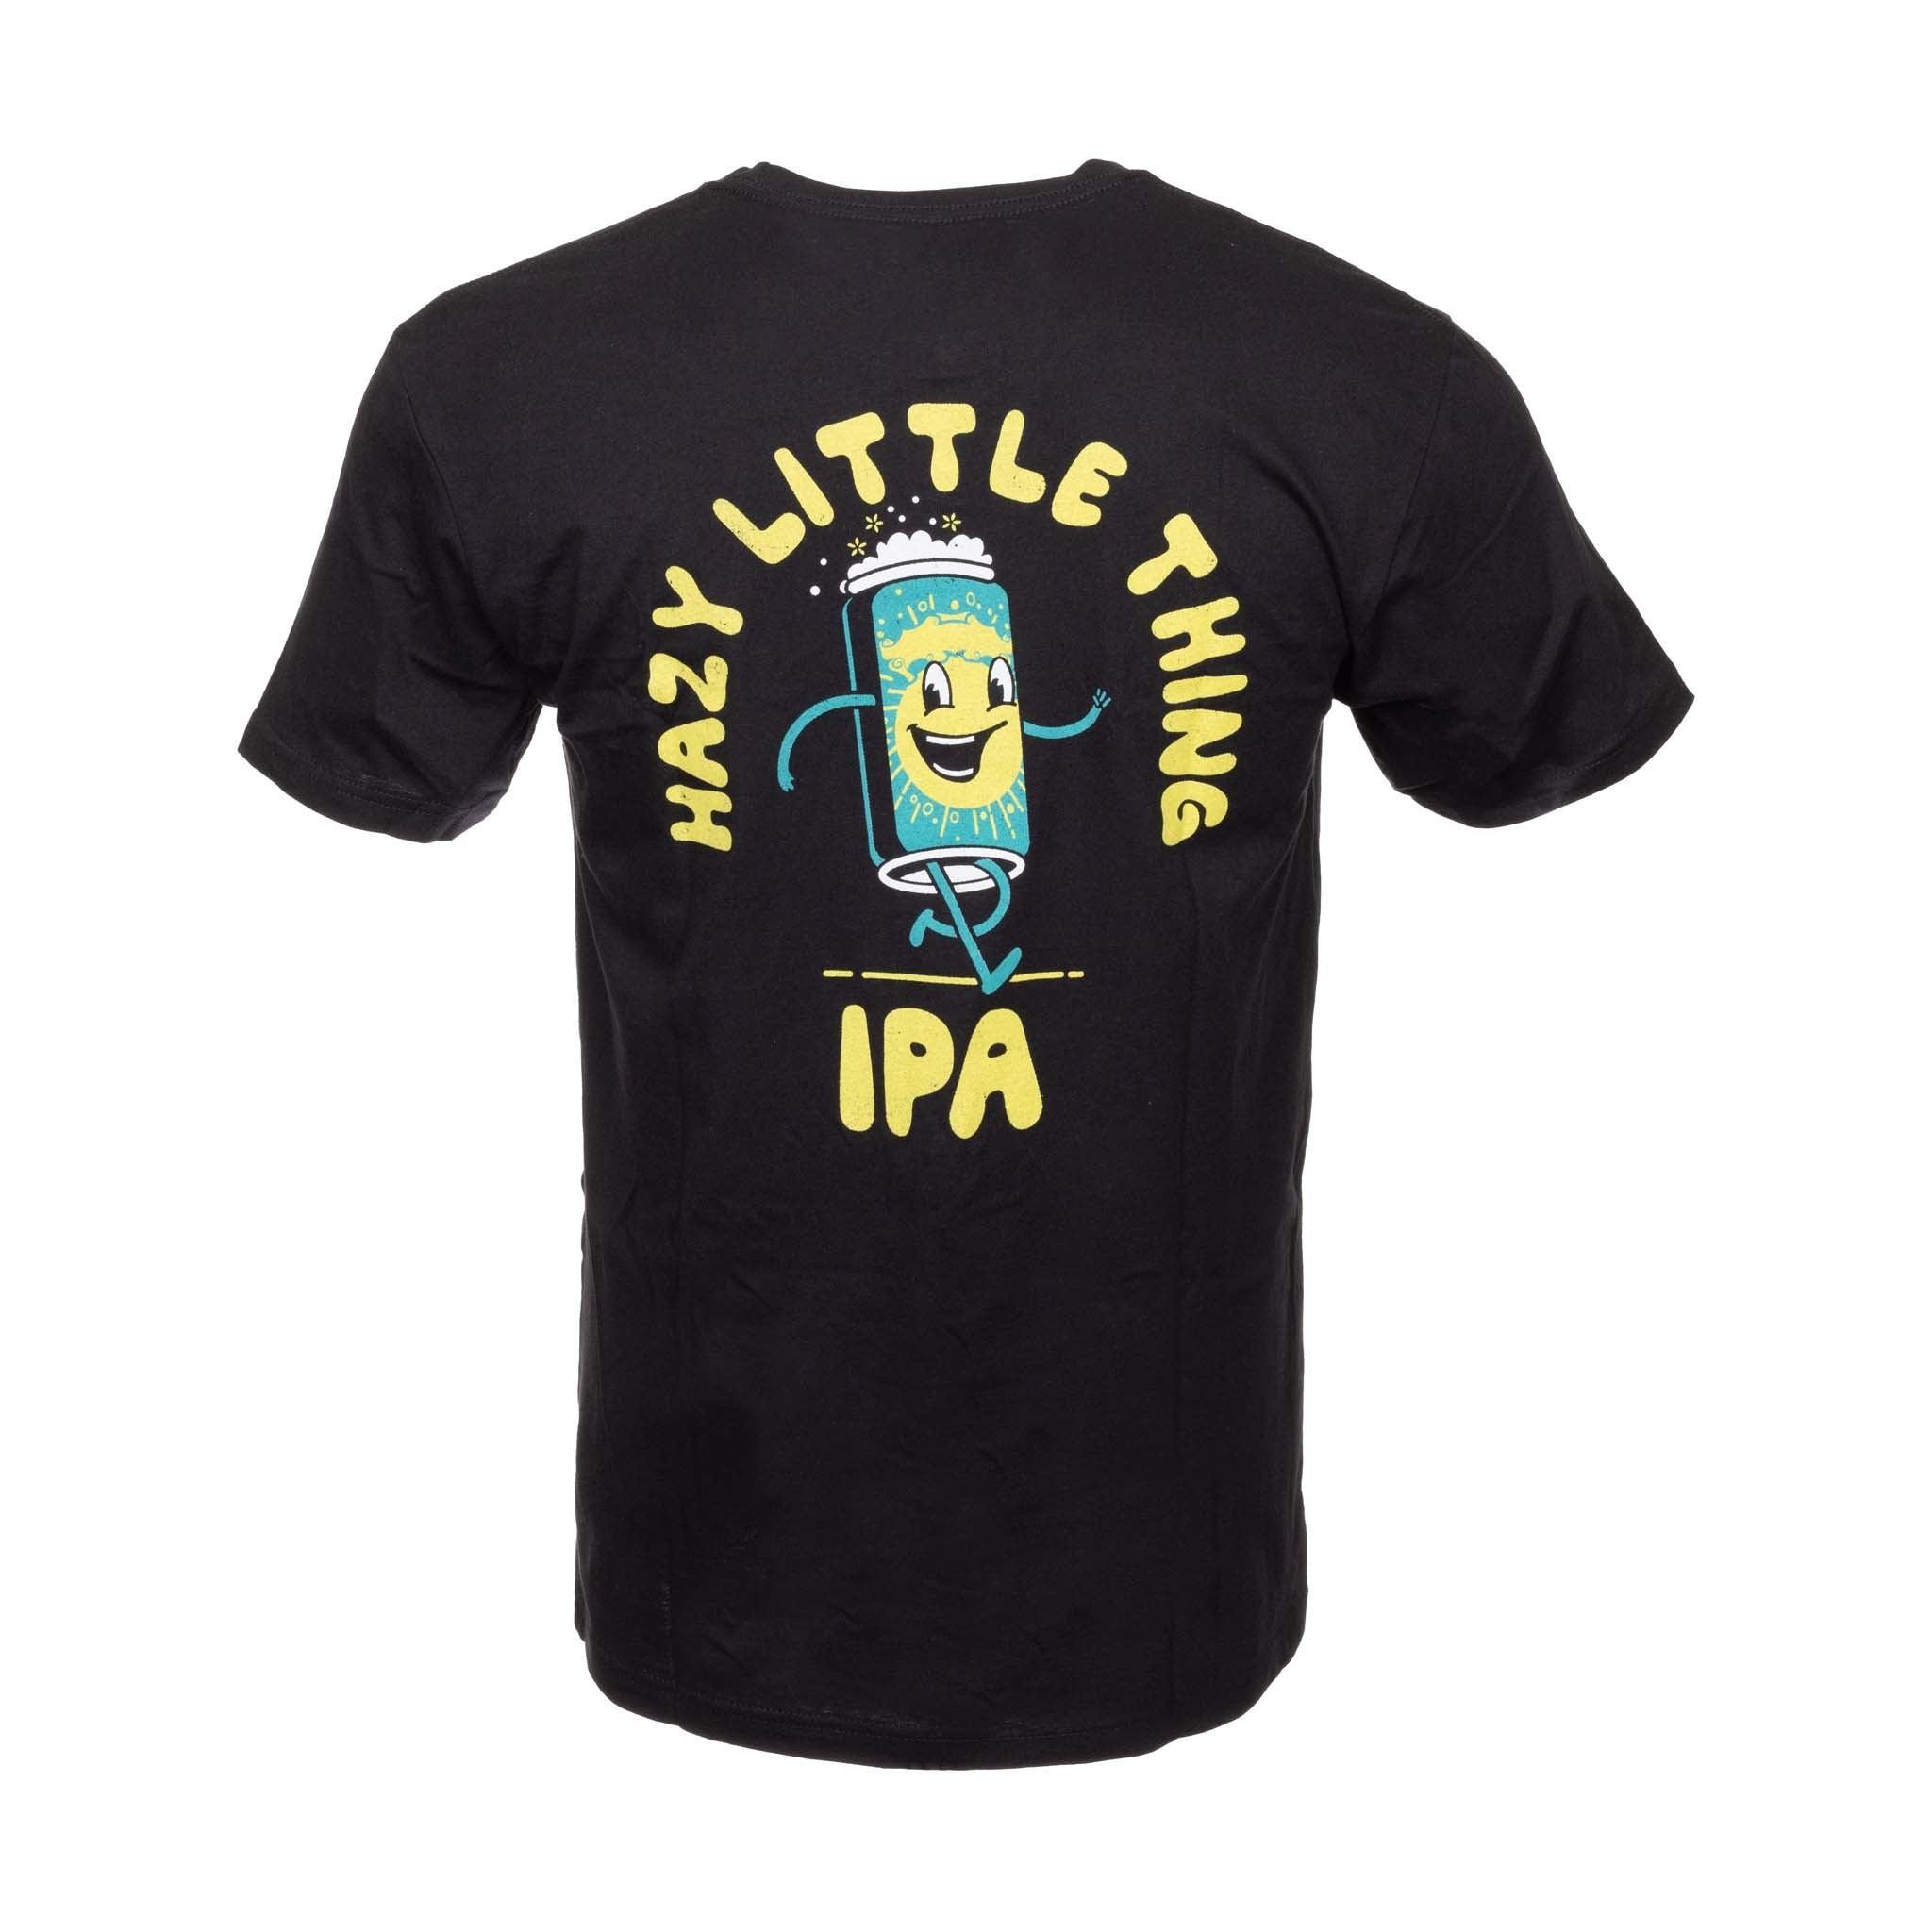 Hazy Little Thing Psychedelic T-Shirt - M